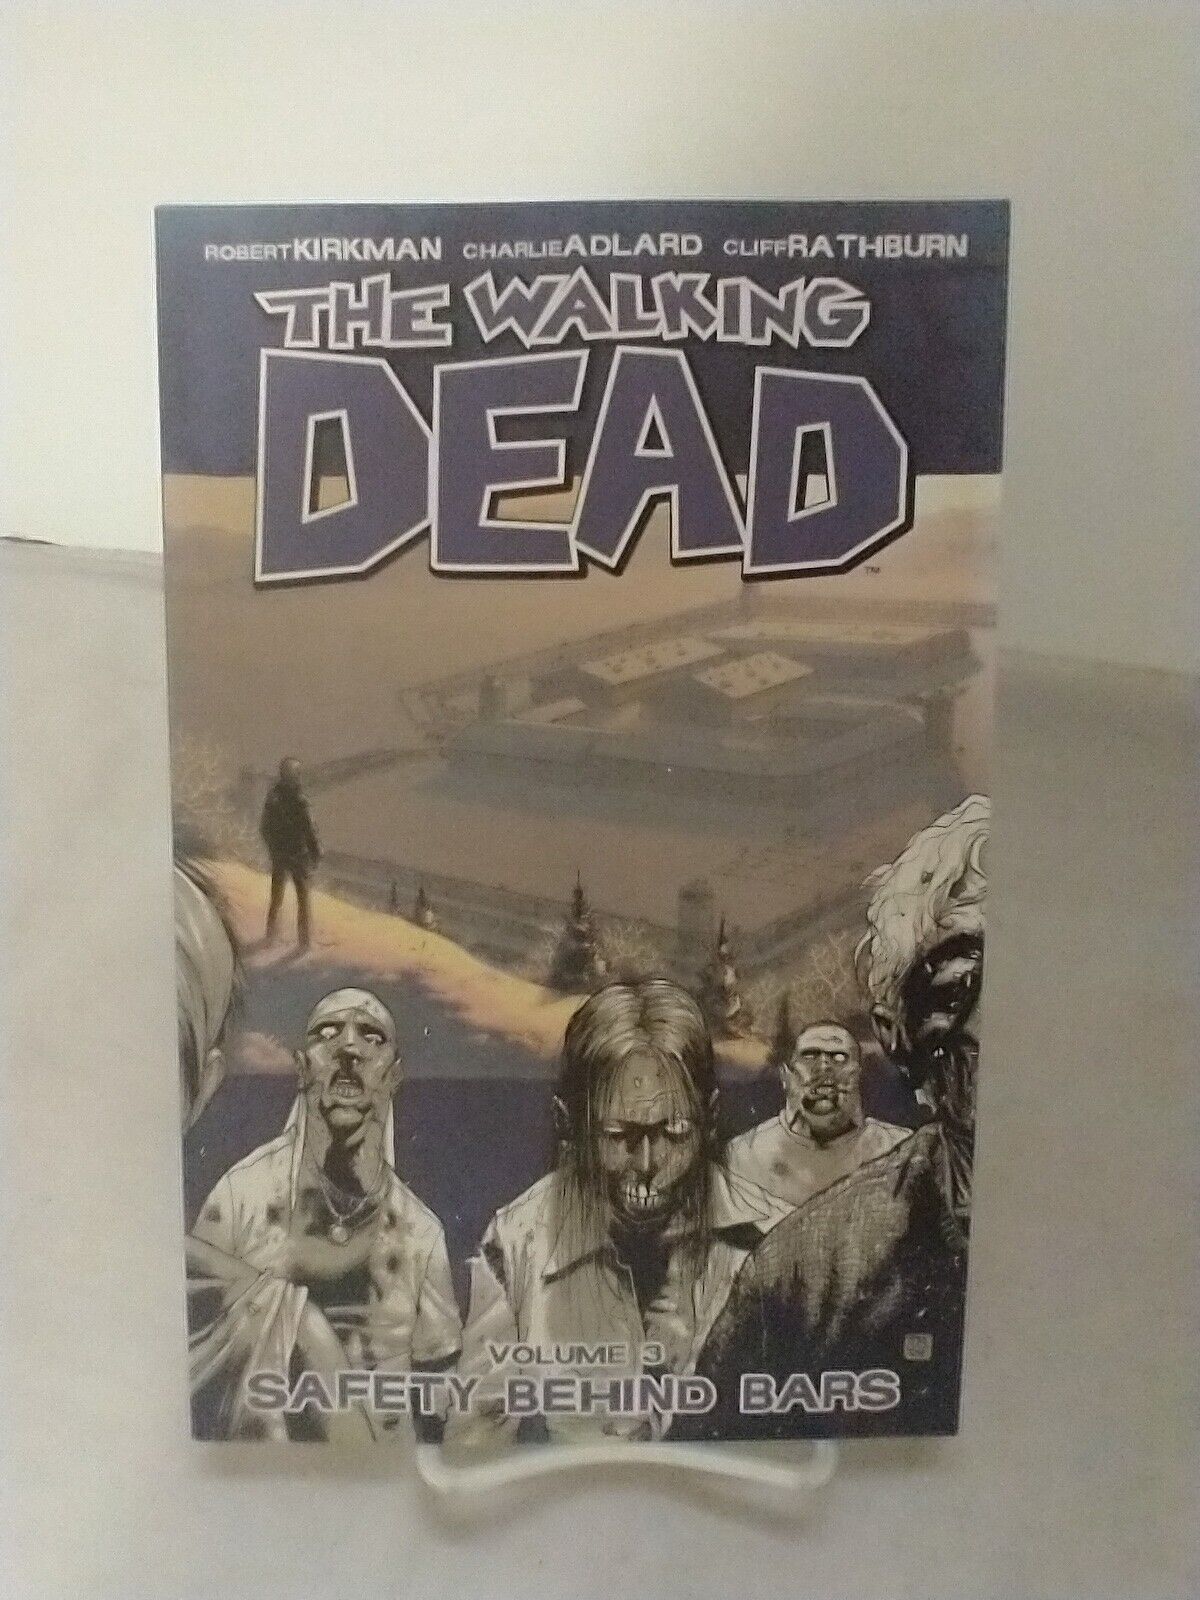 The Walking Dead Volume 3: Safety Behind Bars Trade Paperback Image Comics